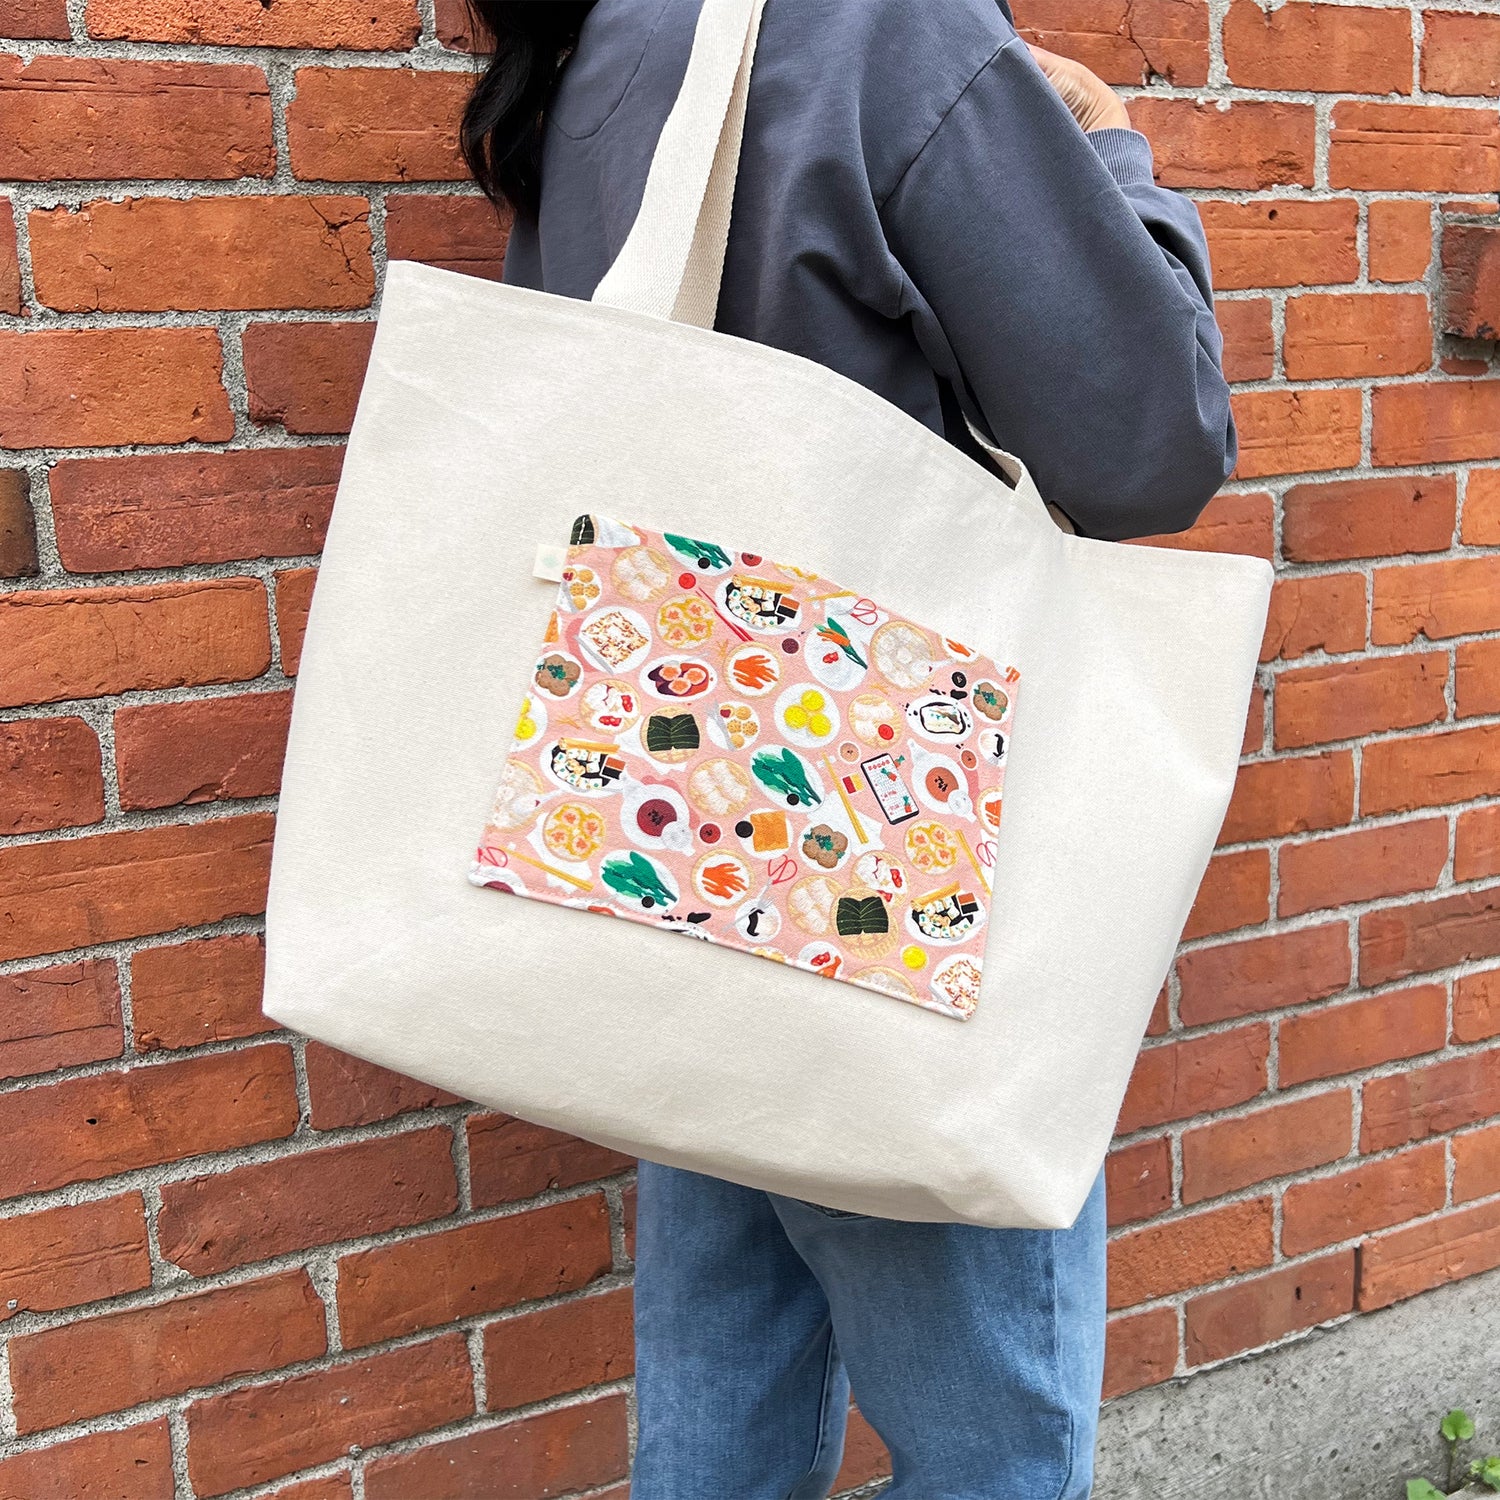 Dim sum pattern canvas tote bag by I&